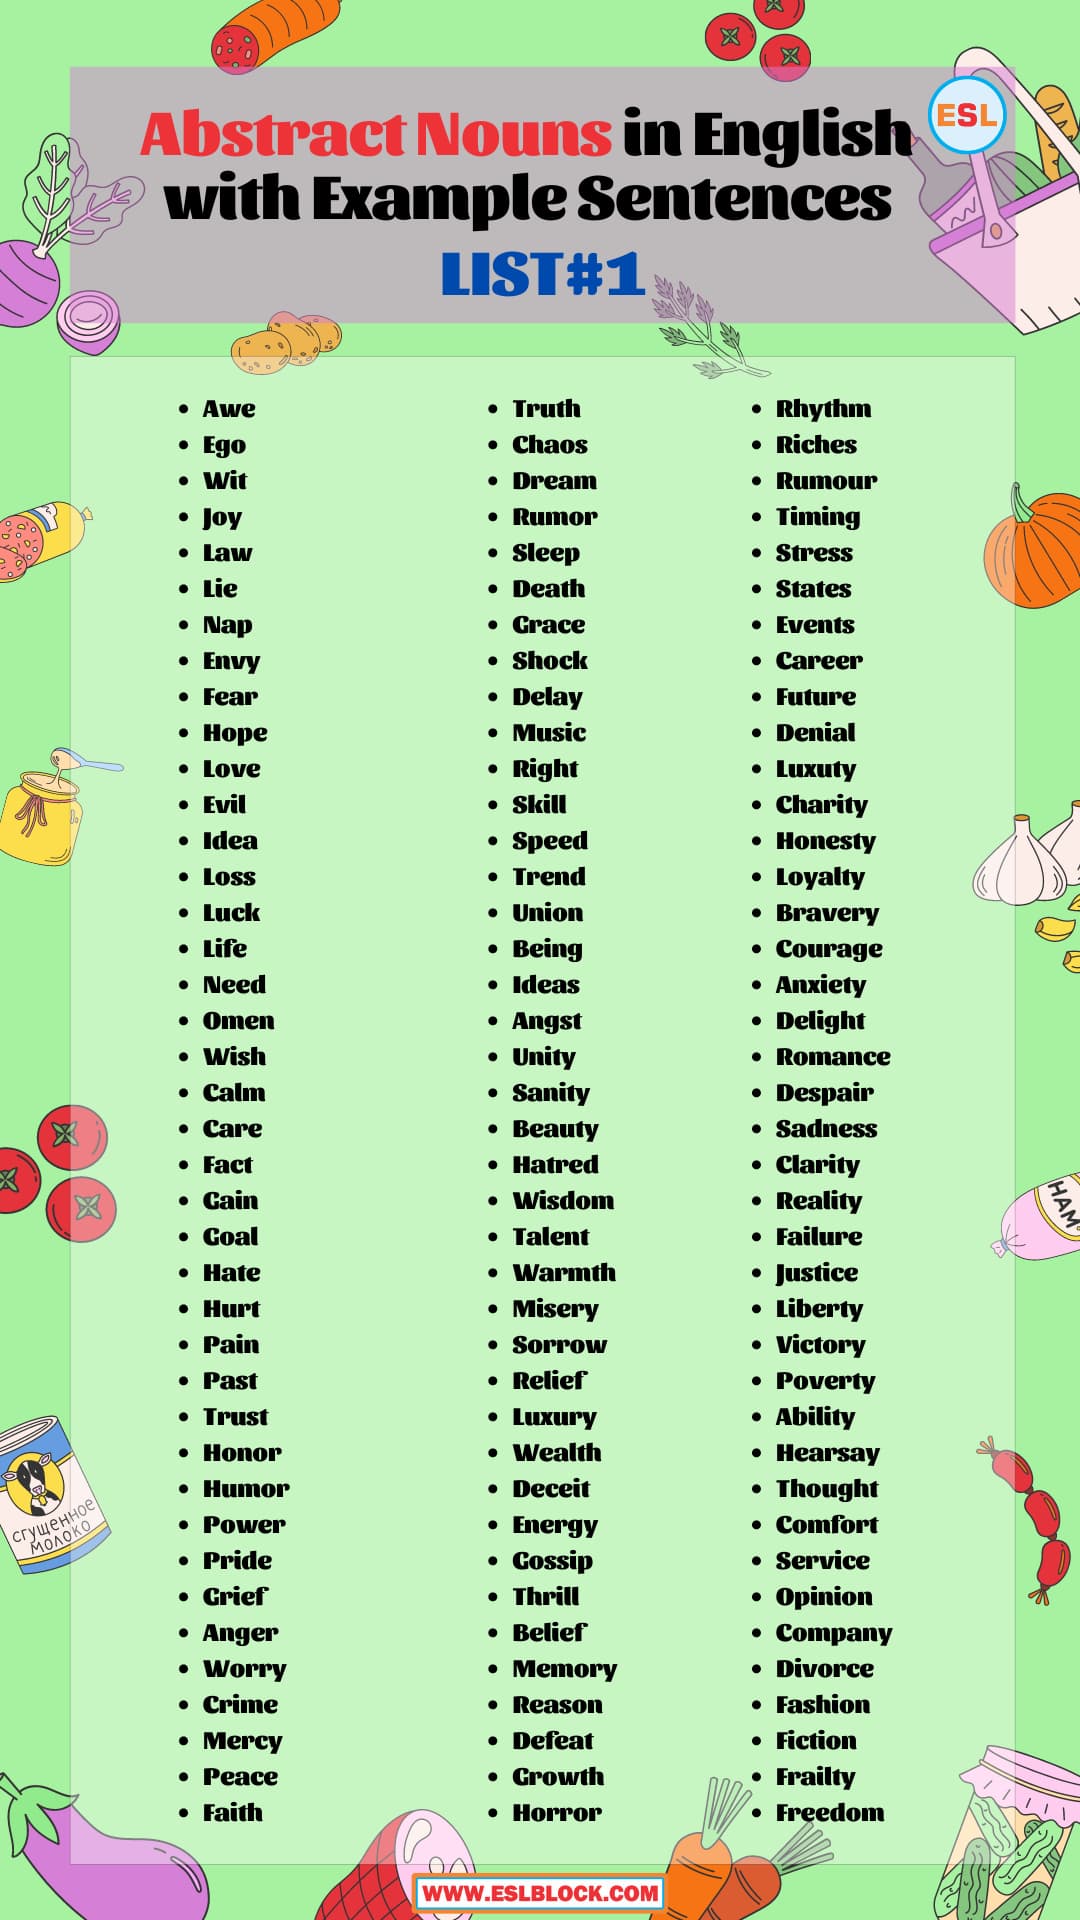 100 Example Sentences Using Abstract, Abstract nouns, Abstract nouns list, Abstract Nouns Vocabulary, Abstract Nouns with Example Sentences, All Abstract nouns, List of Abstract nouns, Types of Nouns, Types of Nouns with Example Sentences, What are Concrete Nouns, What are Nouns, What are the types of Nouns, What is a Noun